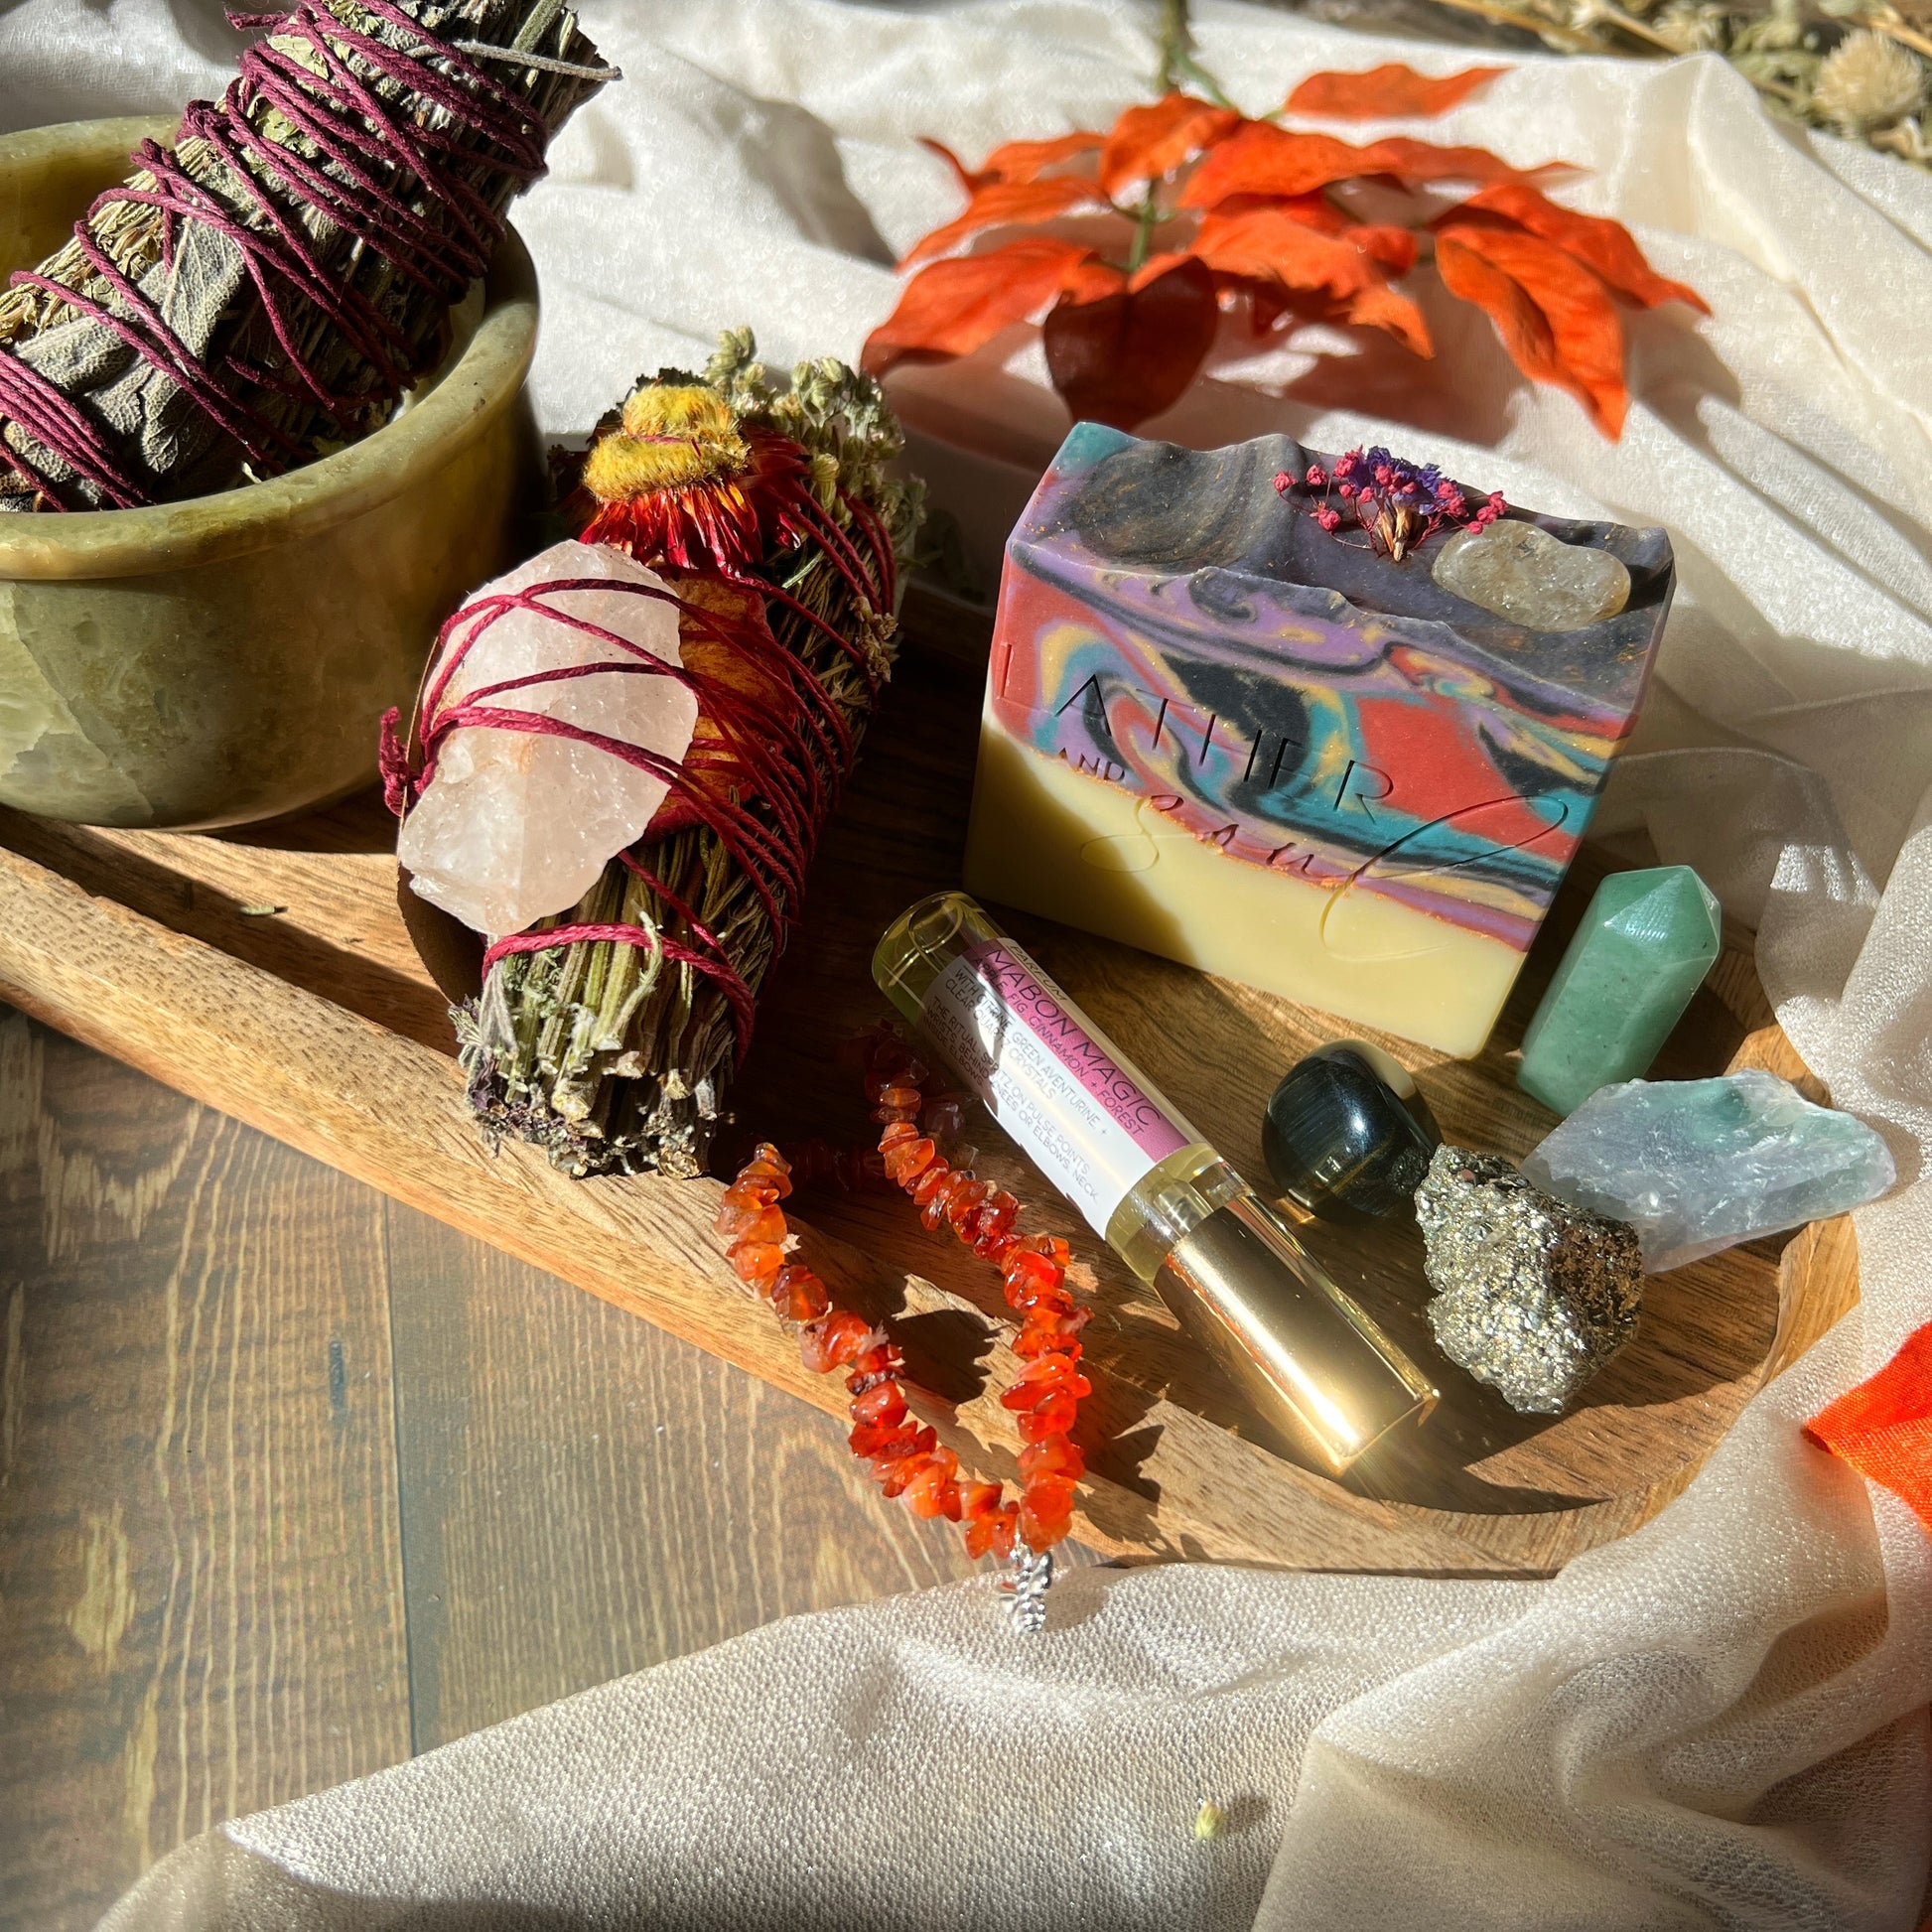 A collection of body care and crystals for Mabon celebrations